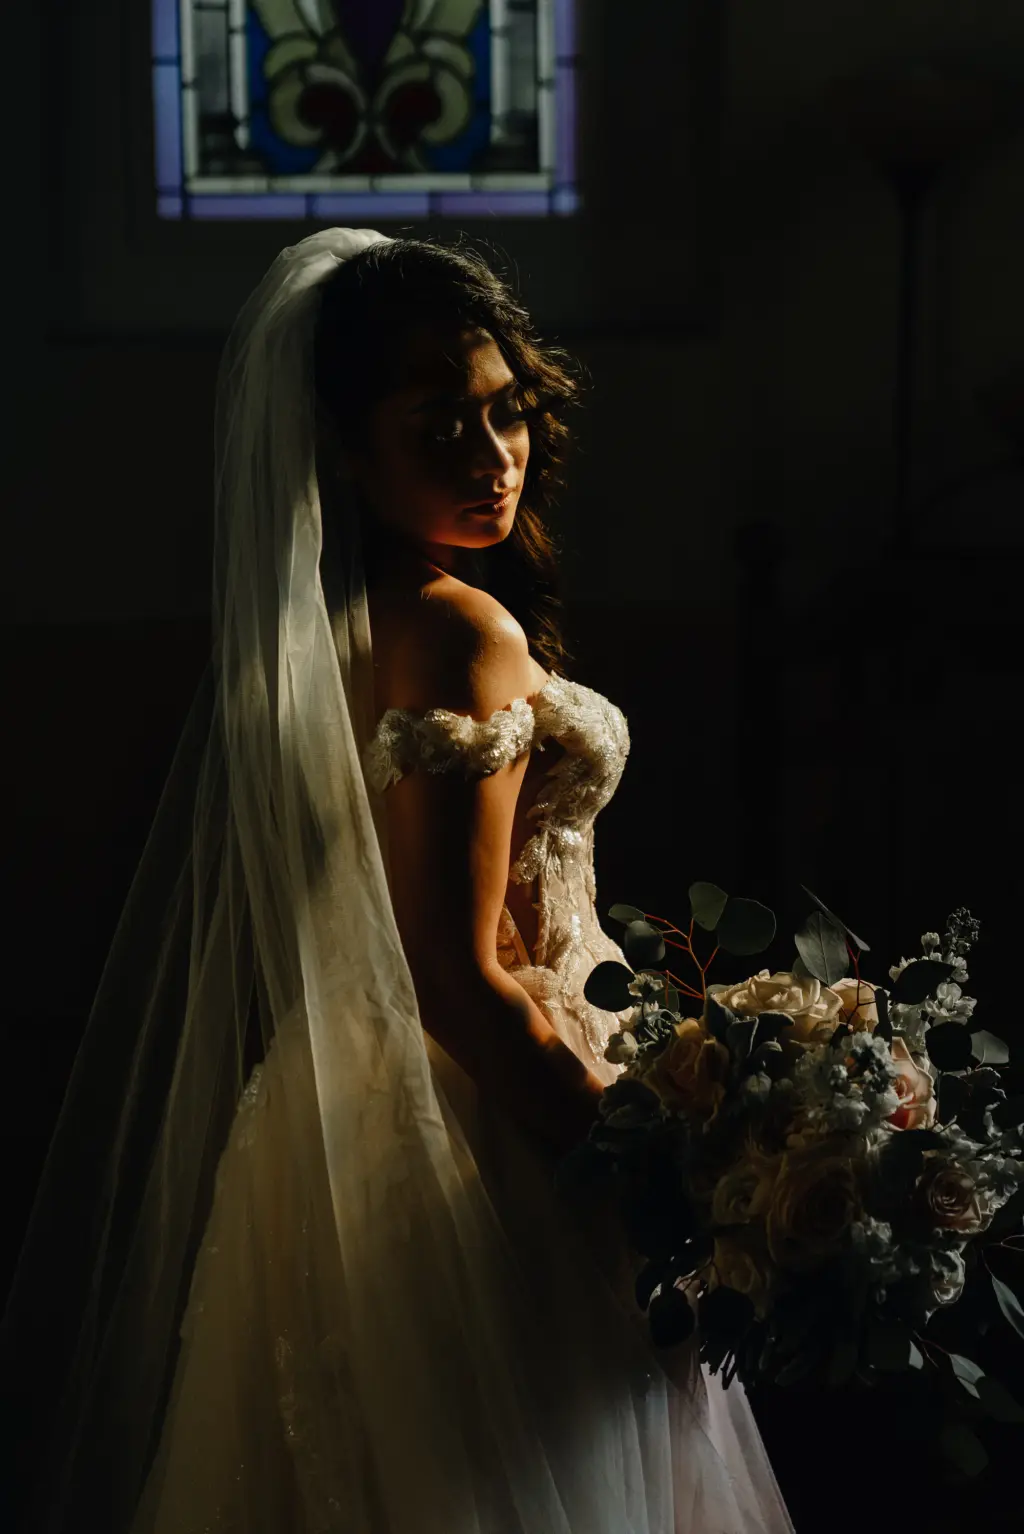 Dark and Moody Bridal Portrait with Cathedral Veil and Floral Bouquet with Off the Shoulder Wedding Dress | Tampa Hair and Makeup Femme Akoi | Photographer J&S Media